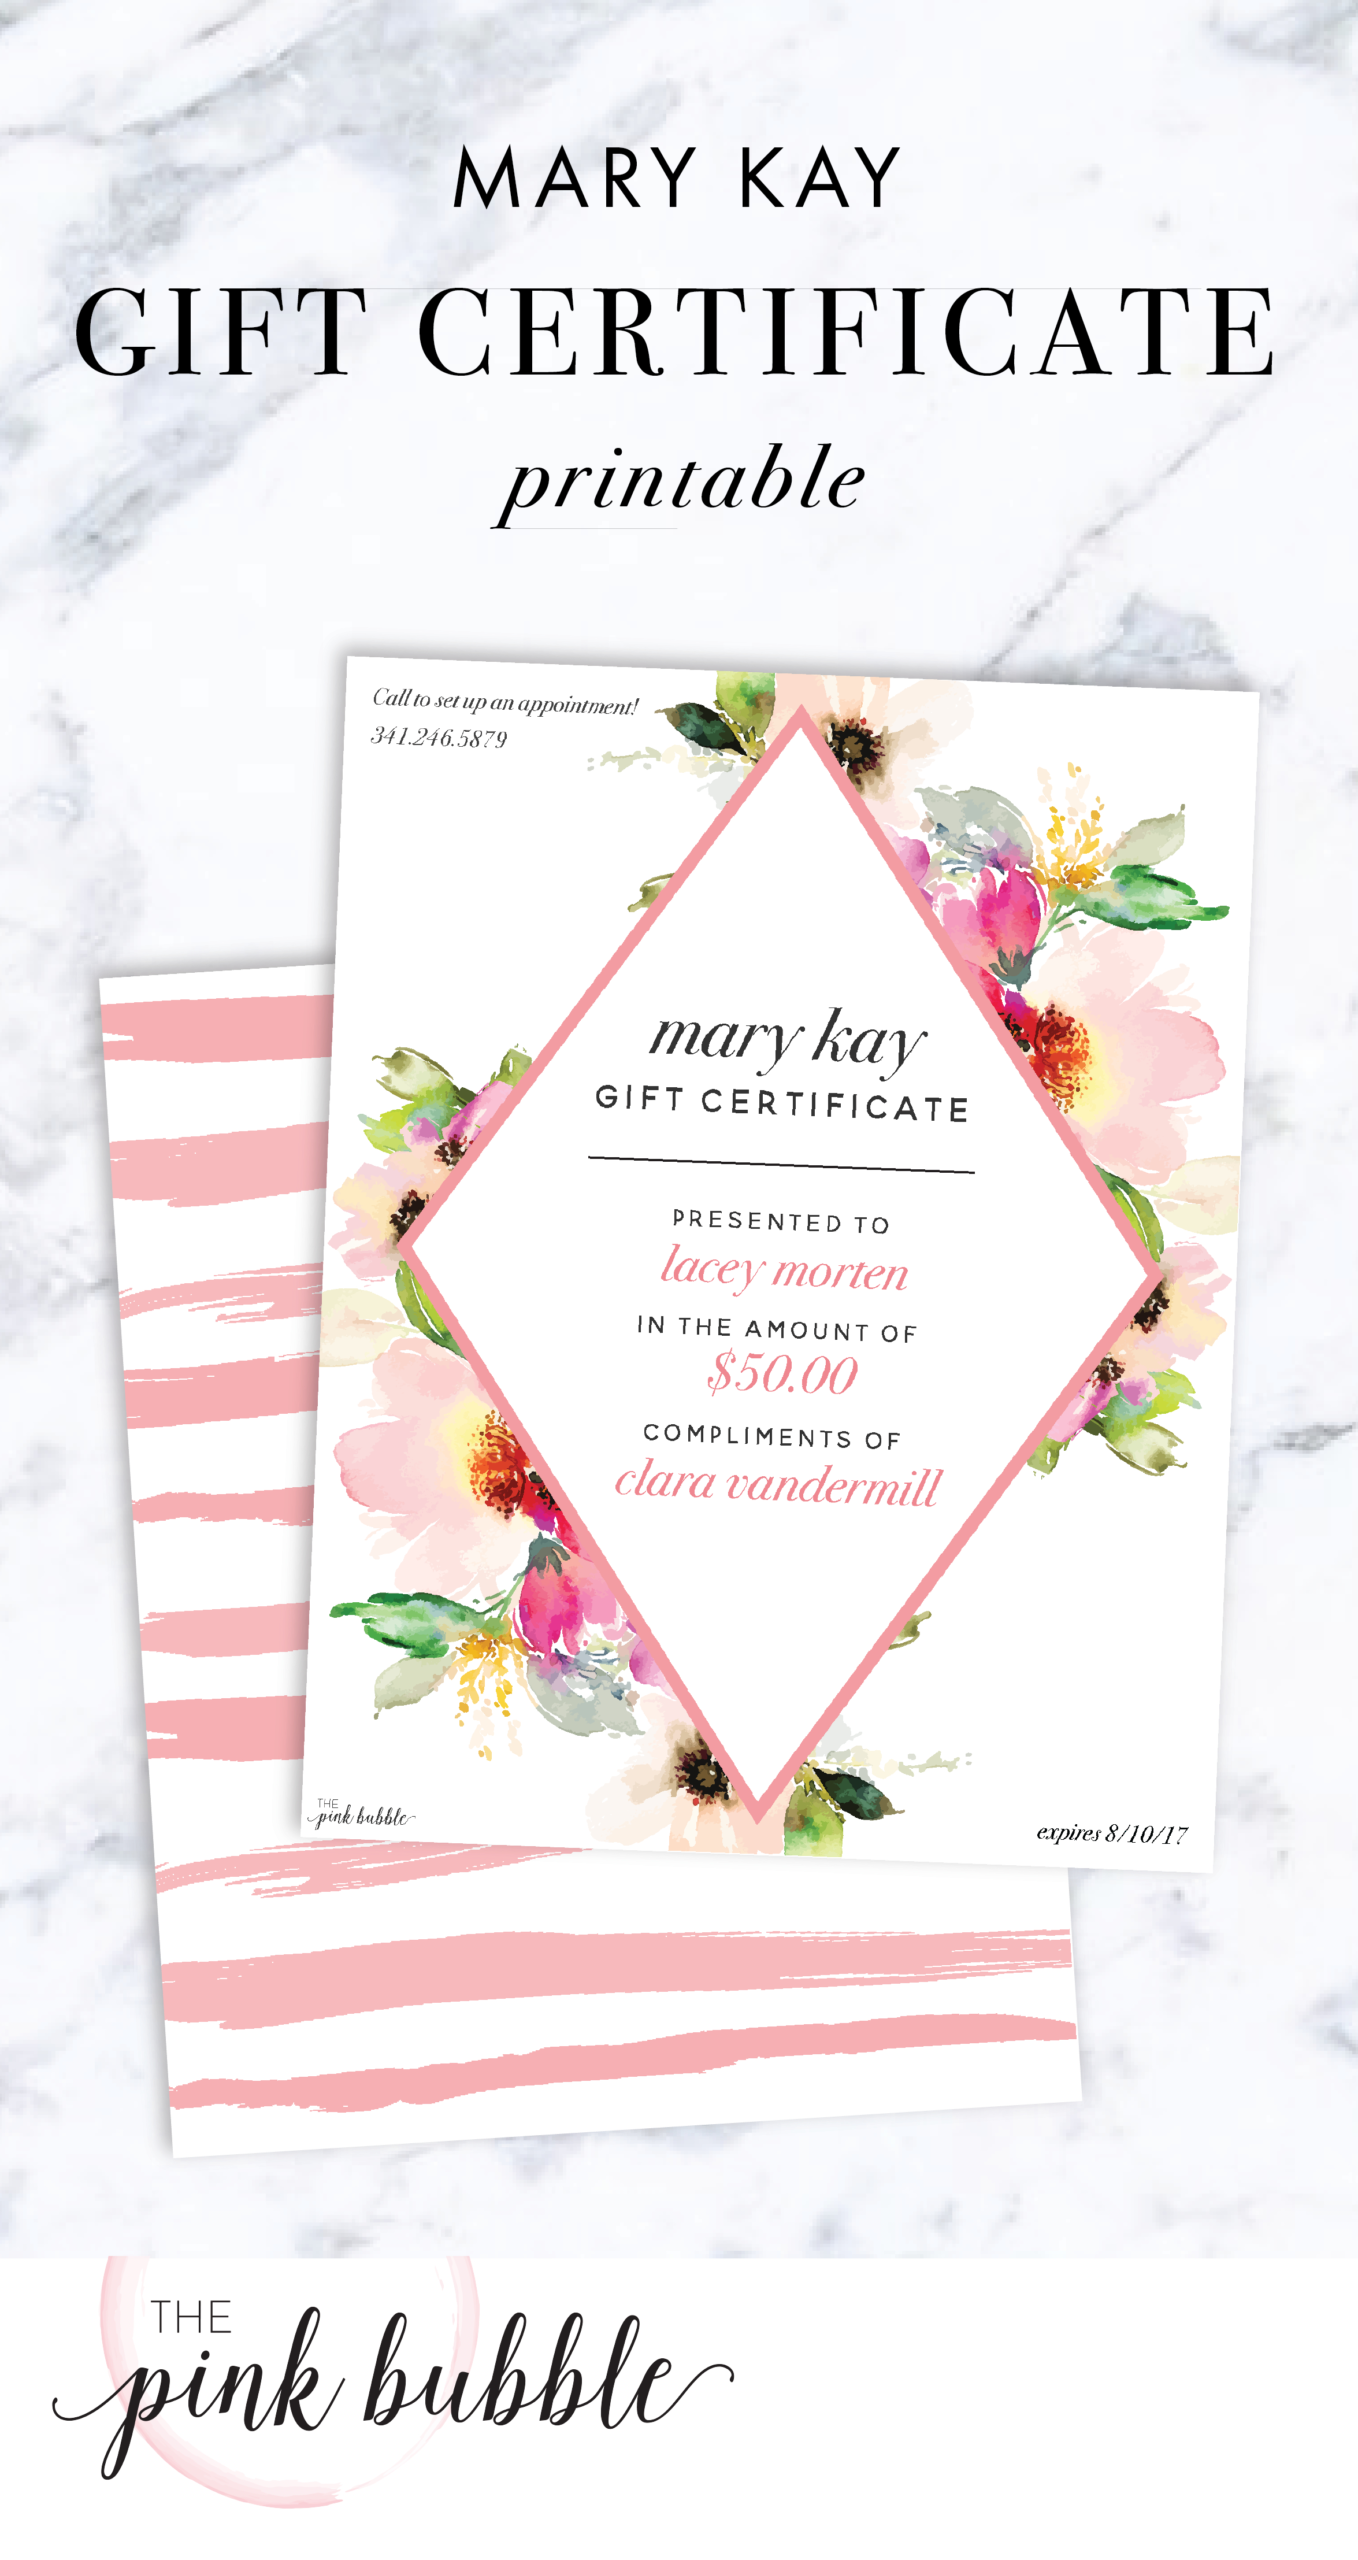 Mary Kay Gift Certificate! Find It Only At Www.thepinkbubble Regarding Mary Kay Gift Certificate Template